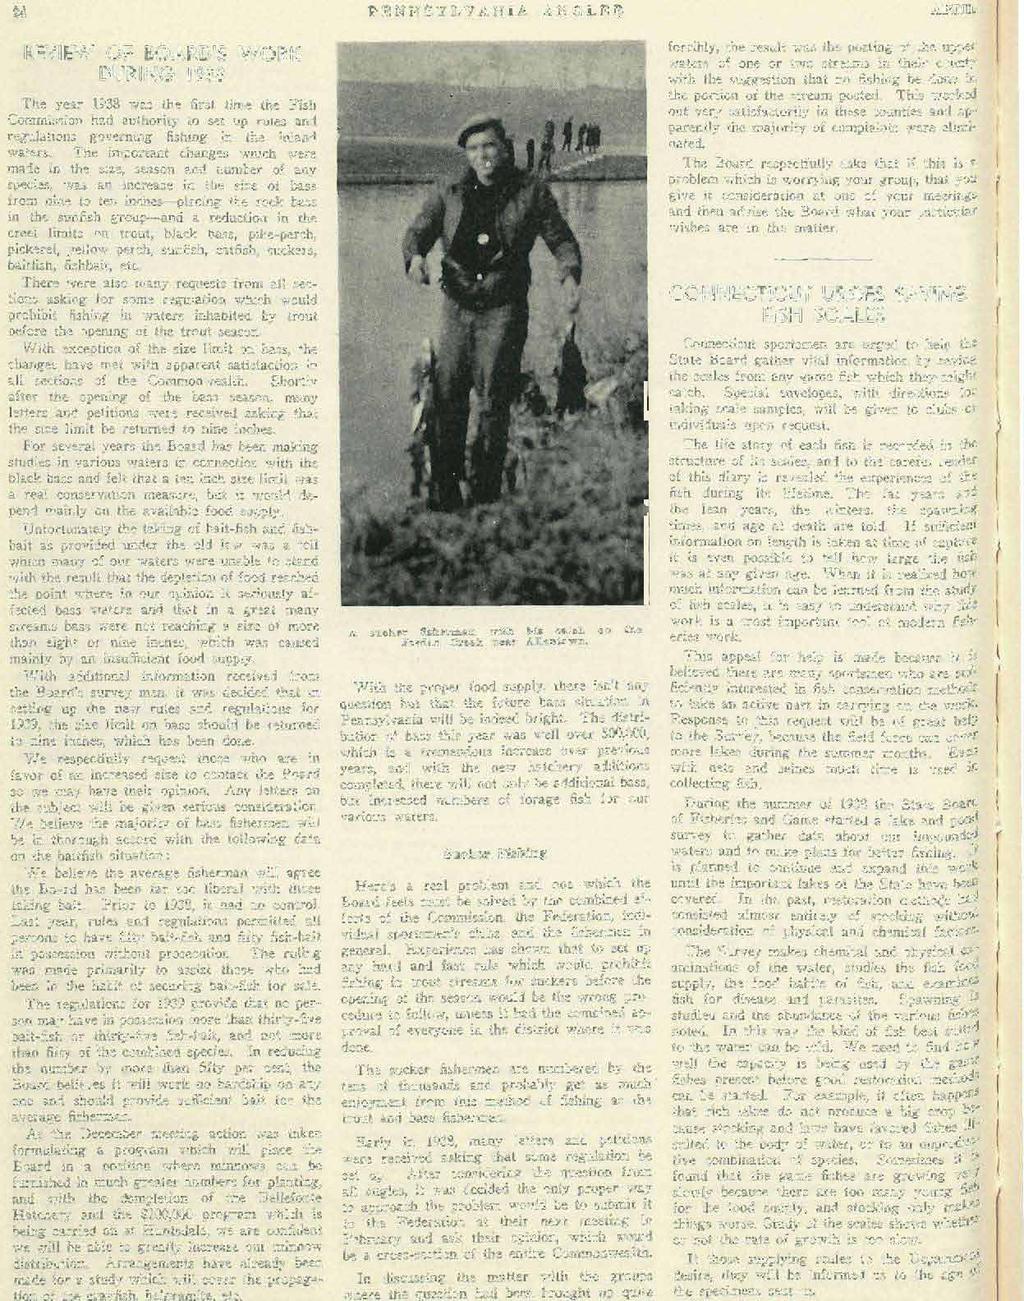 Z4 PENNSYLVANIA ANGLER APRIL REVIEW OF BOARD'S WORK DURING 1938 The year 1938 was the first time the Fish Commission had authority to set up rules and regulations governing fishing in the inland